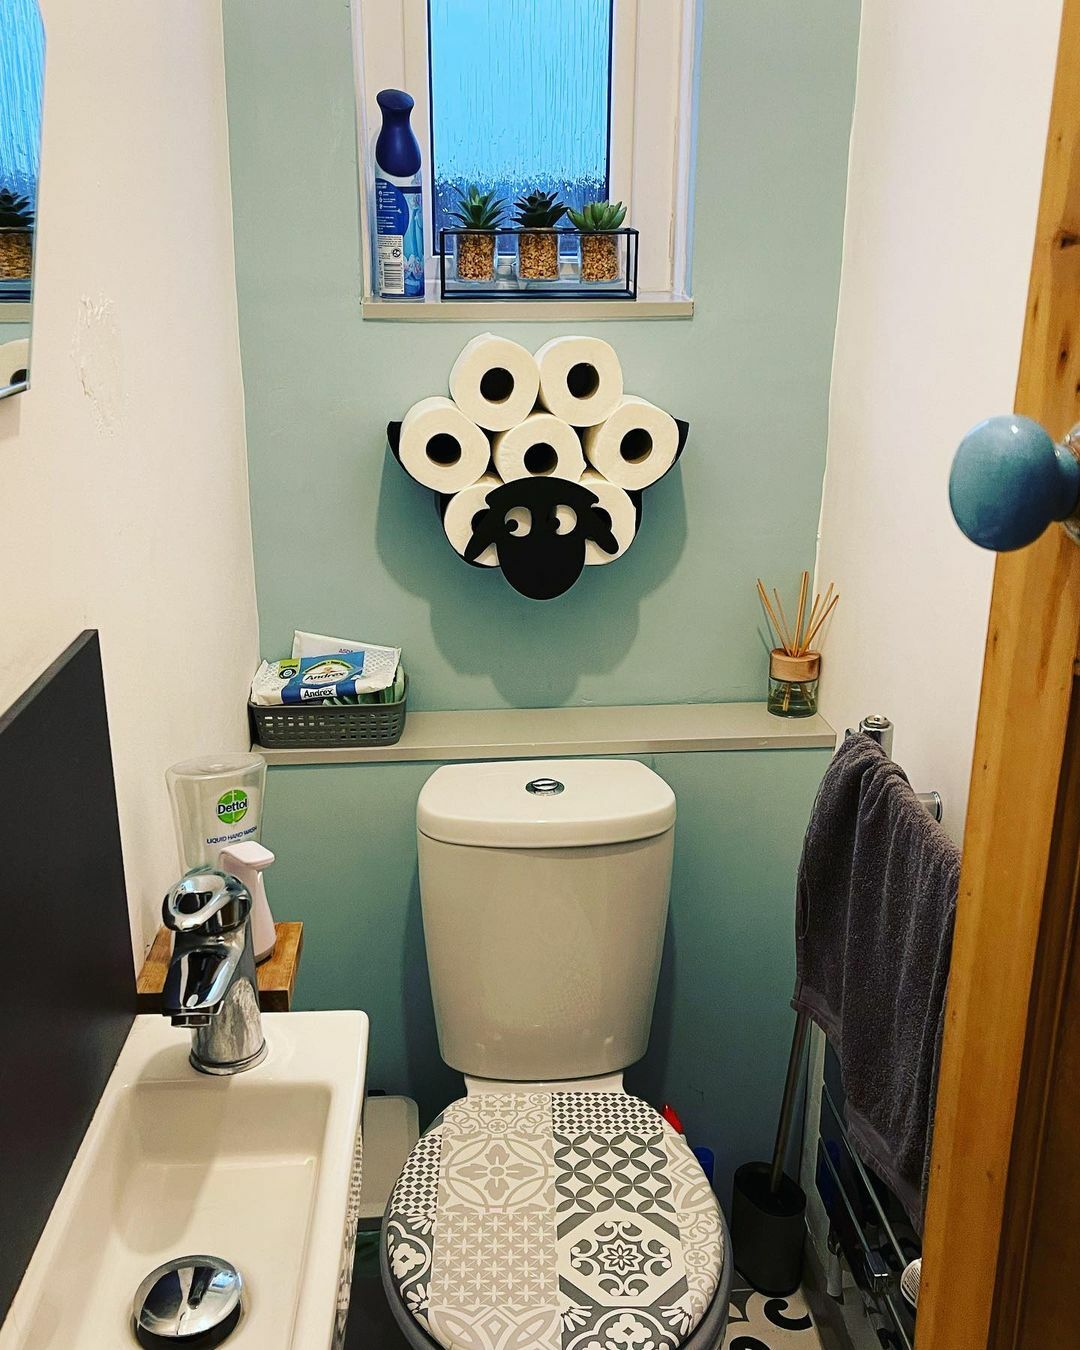 Put Up Our New Toilet Roll Holder, And I'm So Chuffed With It. Haha. He Just Had To Take Centre Stage!